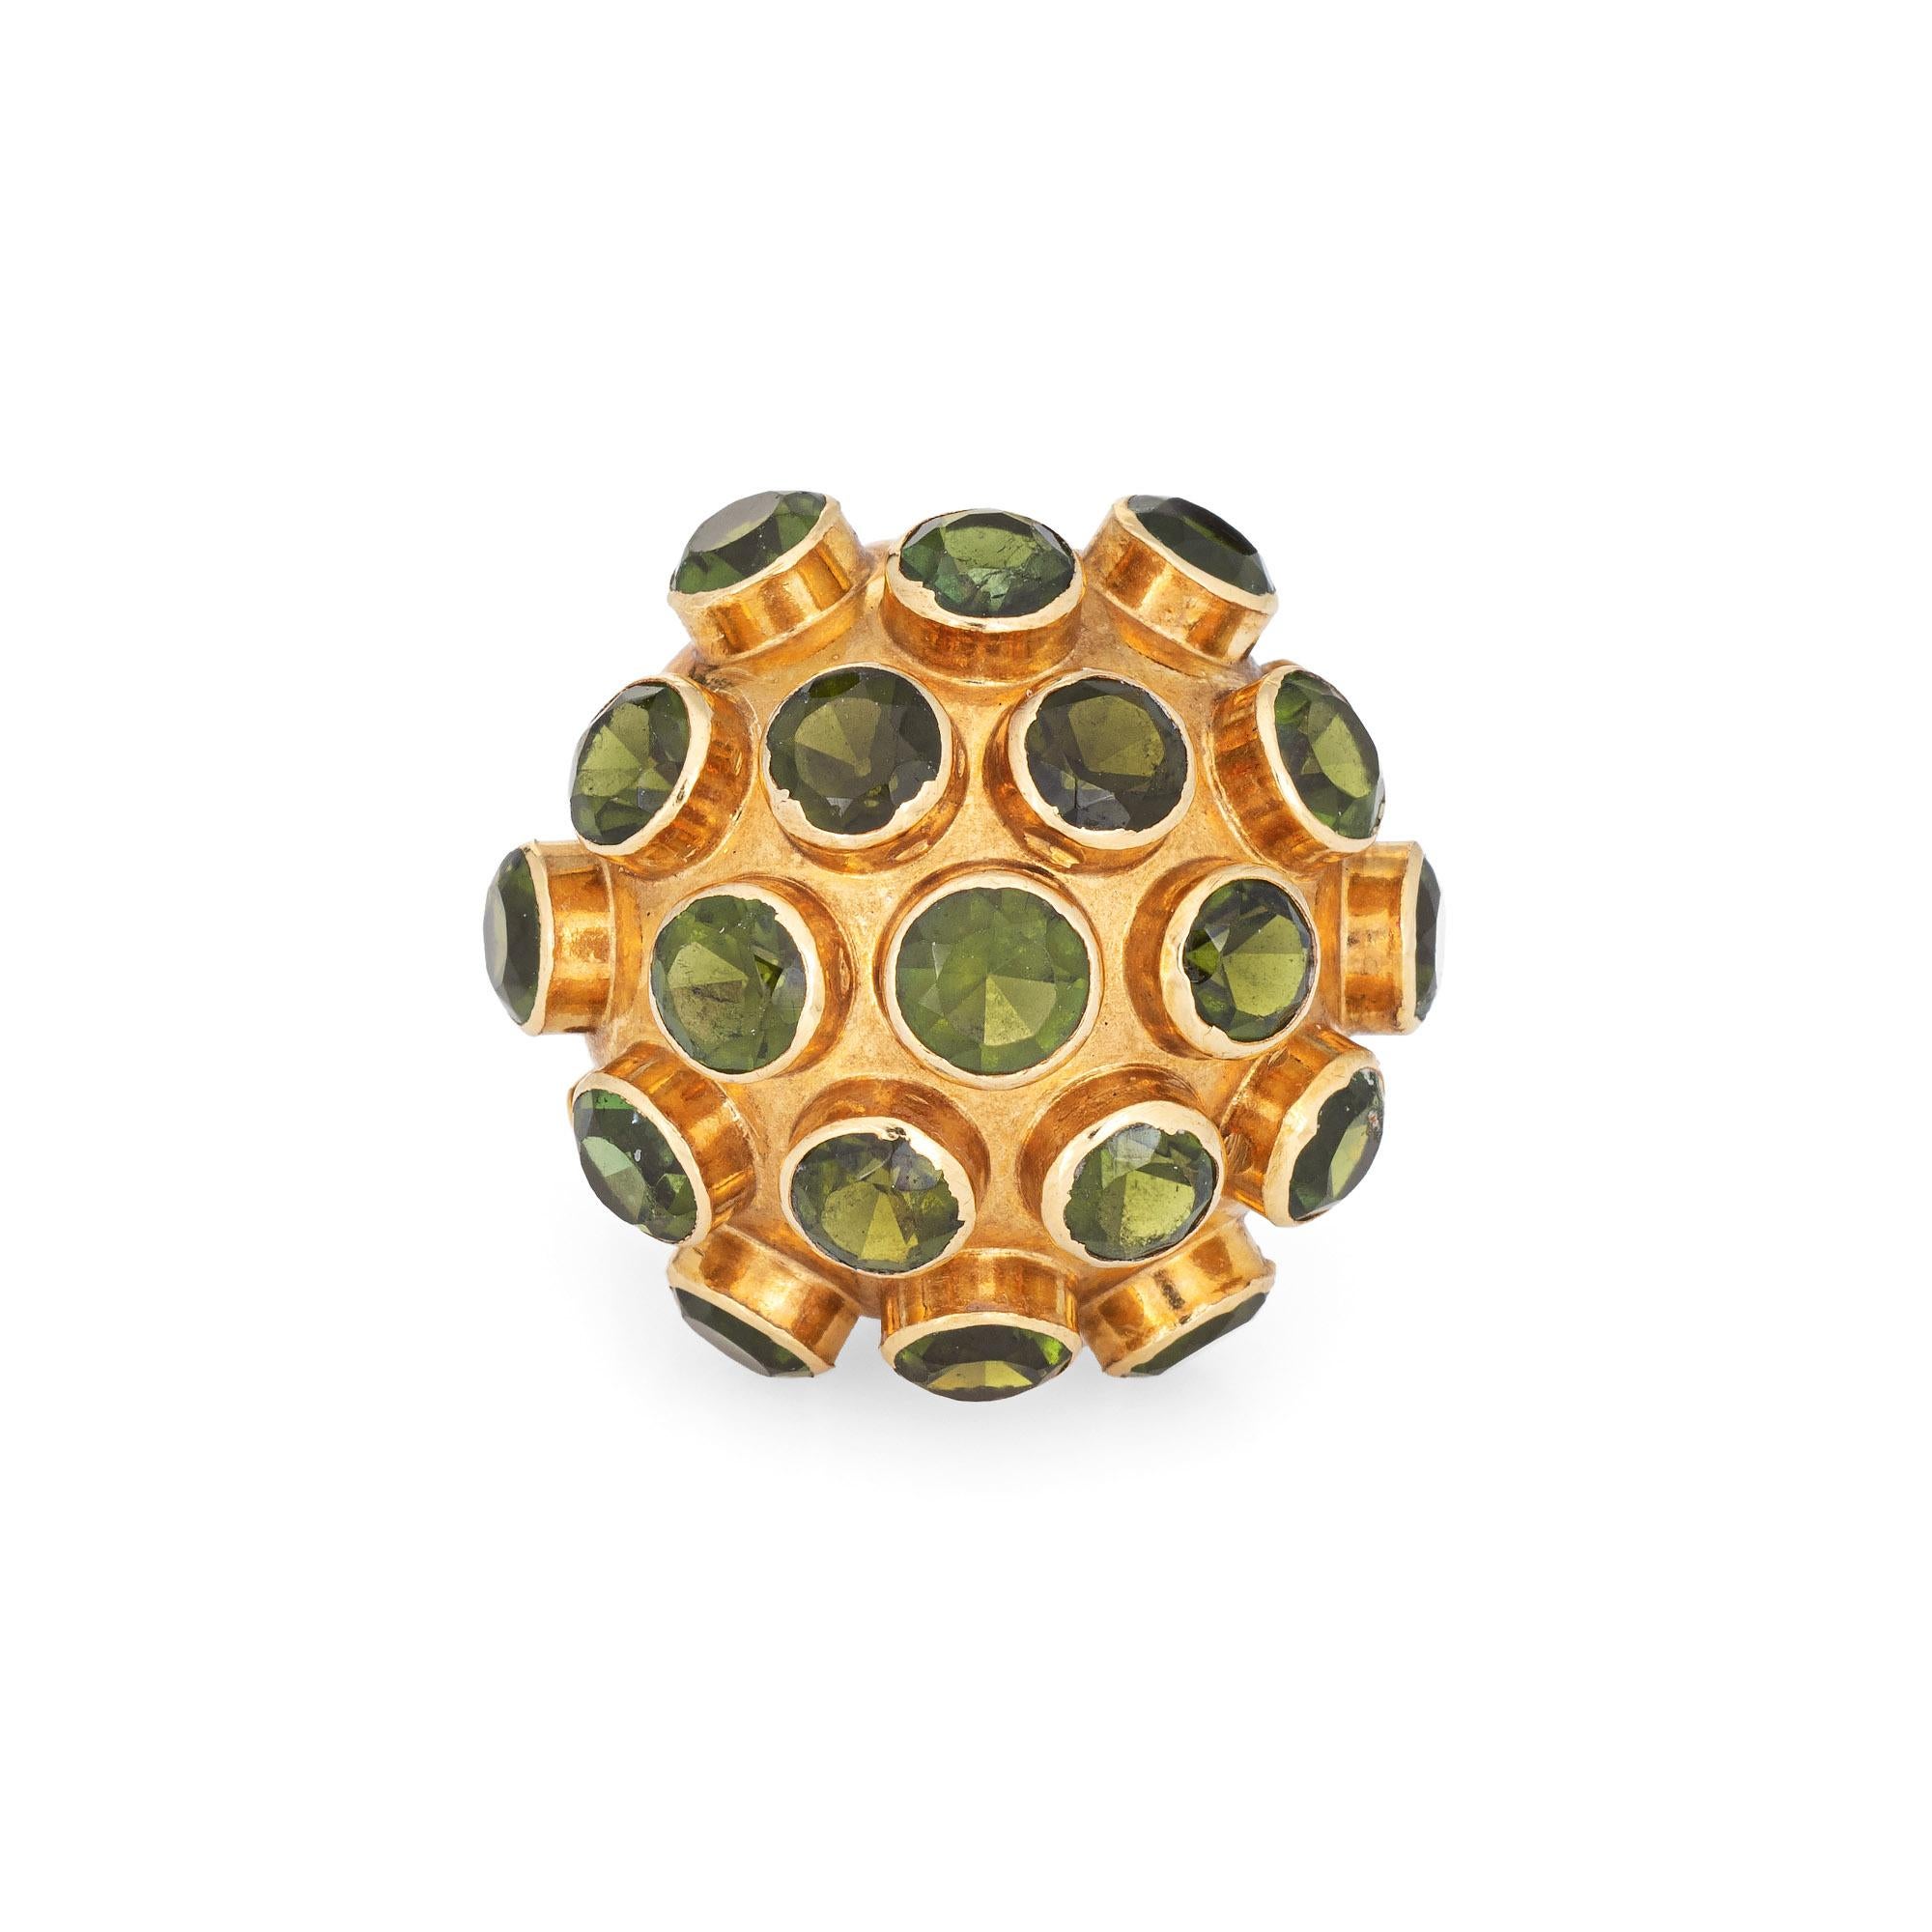 Ornate H Stern sputnik domed peridot cocktail ring (circa 1950s to 1960s), crafted in 18 karat yellow gold. 

Peridot totals an estimated 4.75 carats (few light surface abrasions visible under a 10x loupe).

The dome measures 22mm diameter (0.86